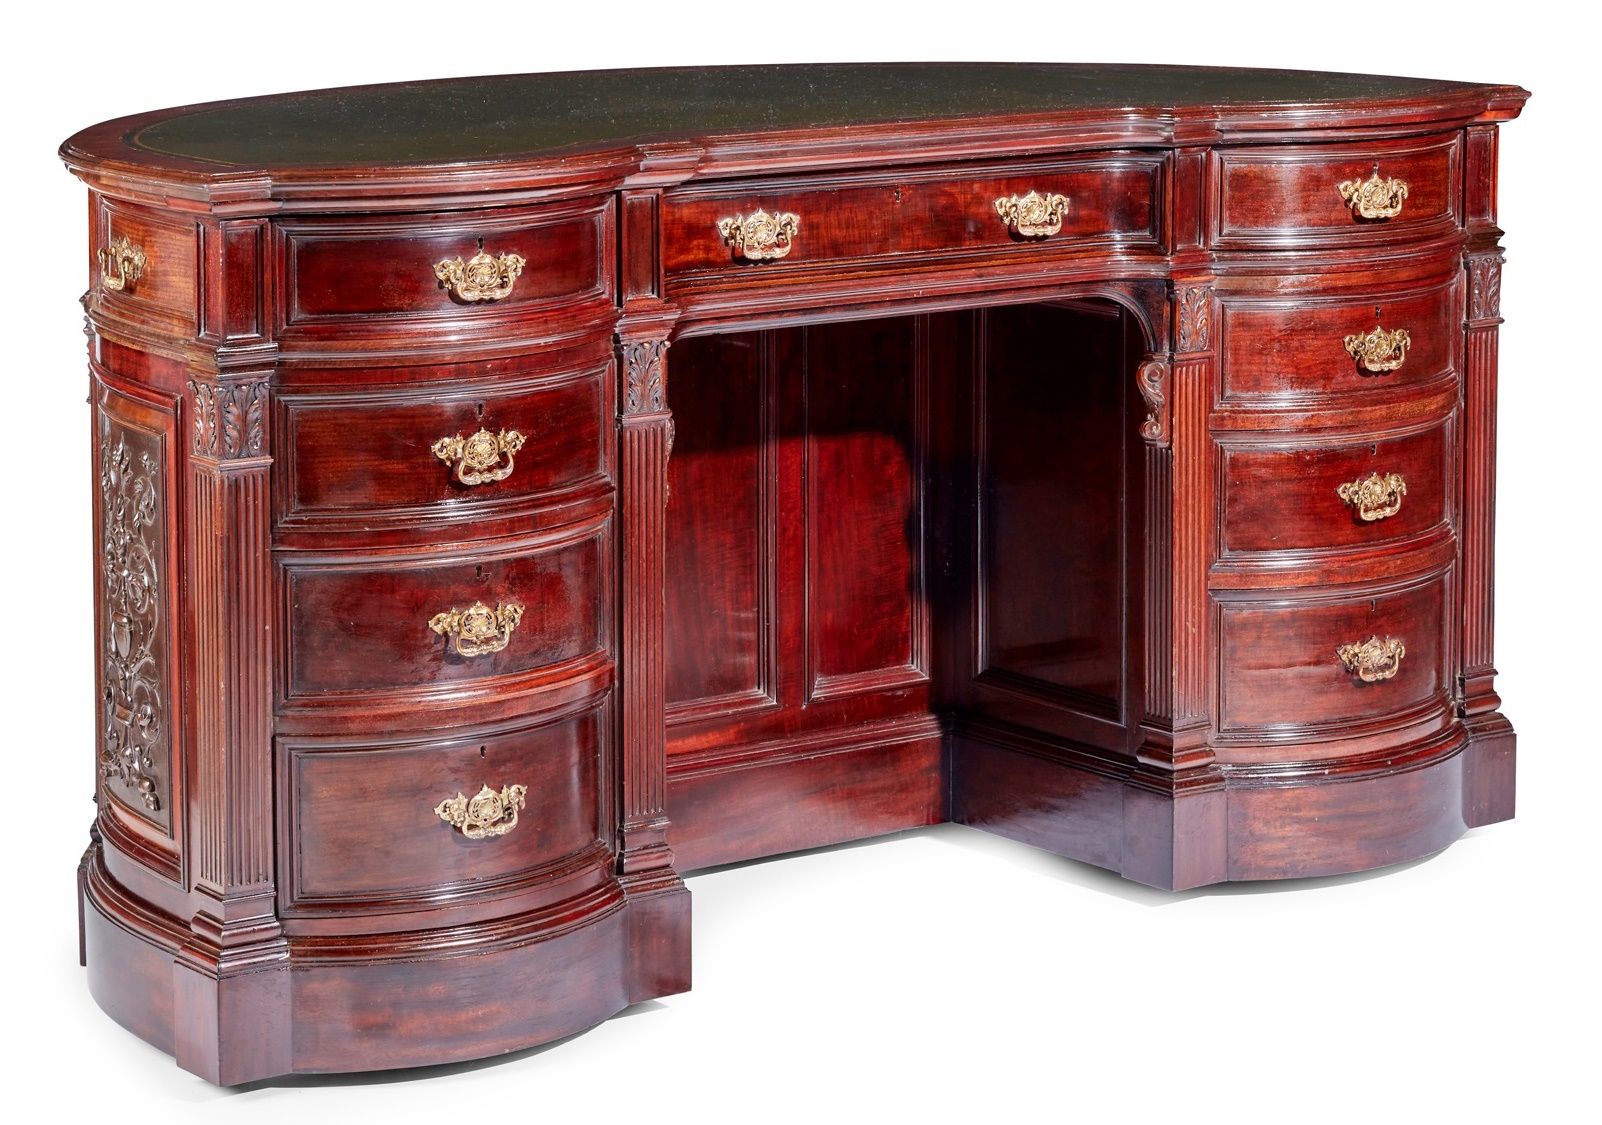 Fine chippendale style mahogany desk by Hampton & Sons.